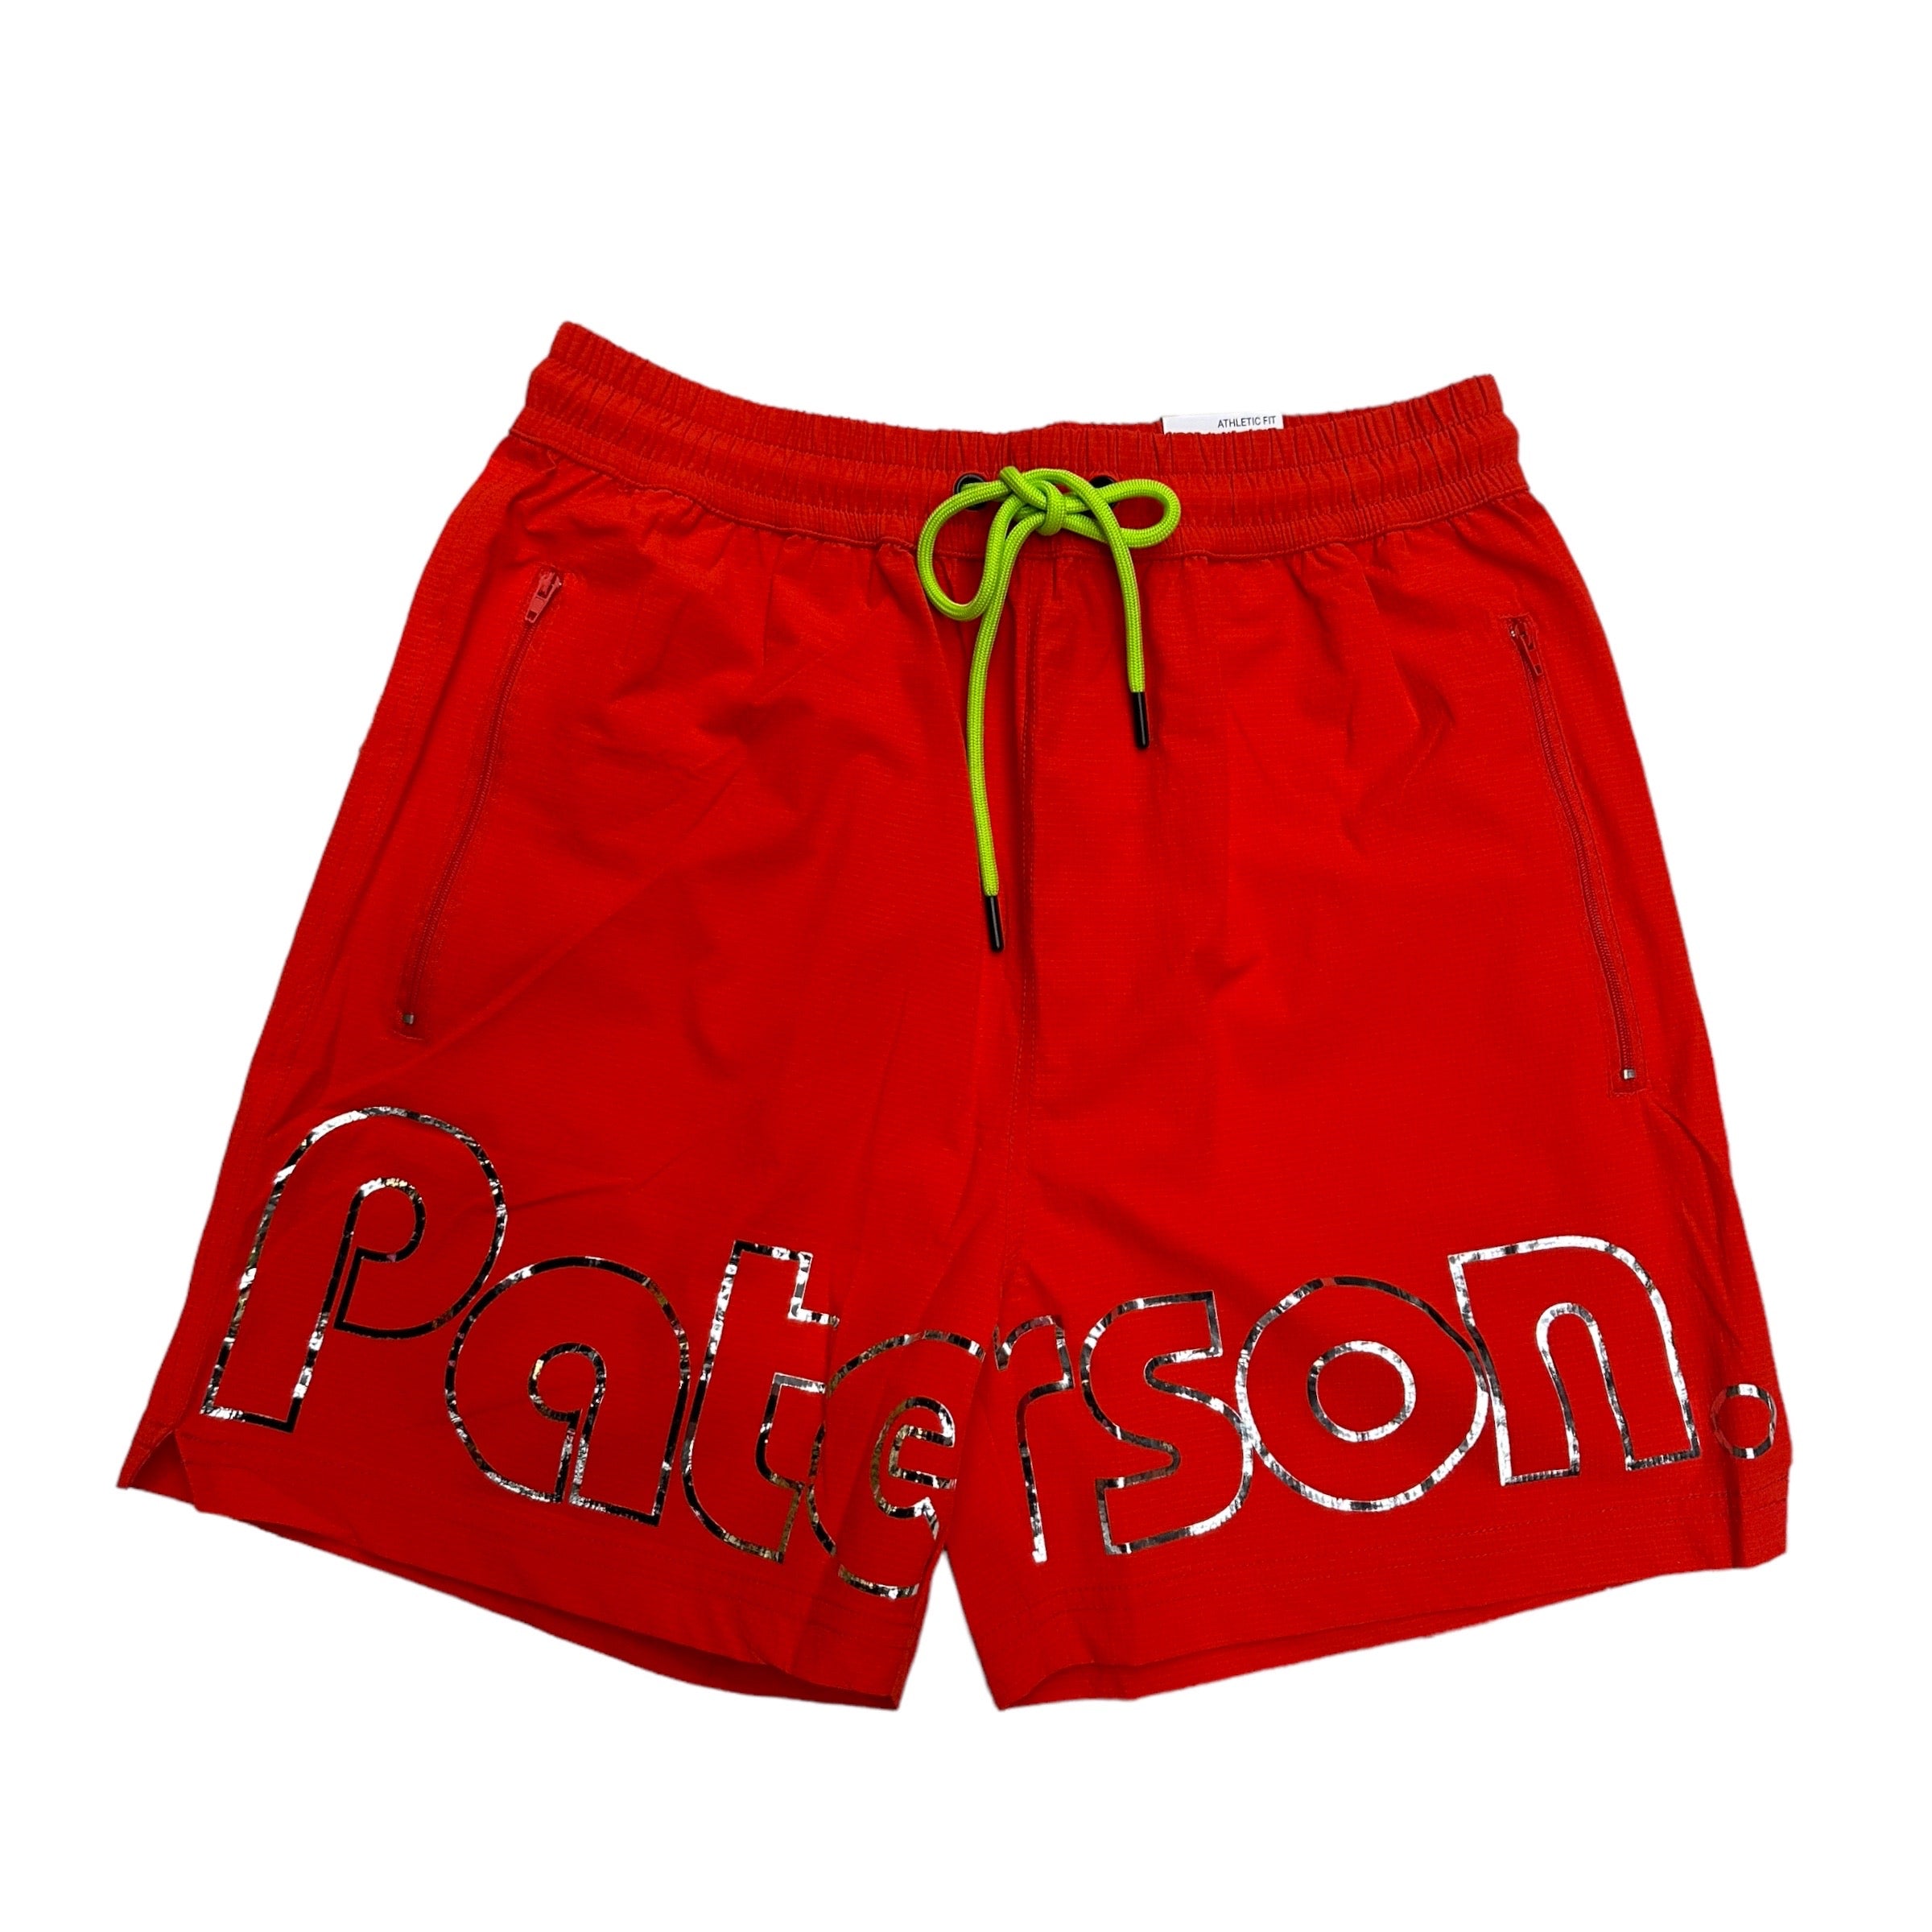 paterson nynlon short  Red sliver p46